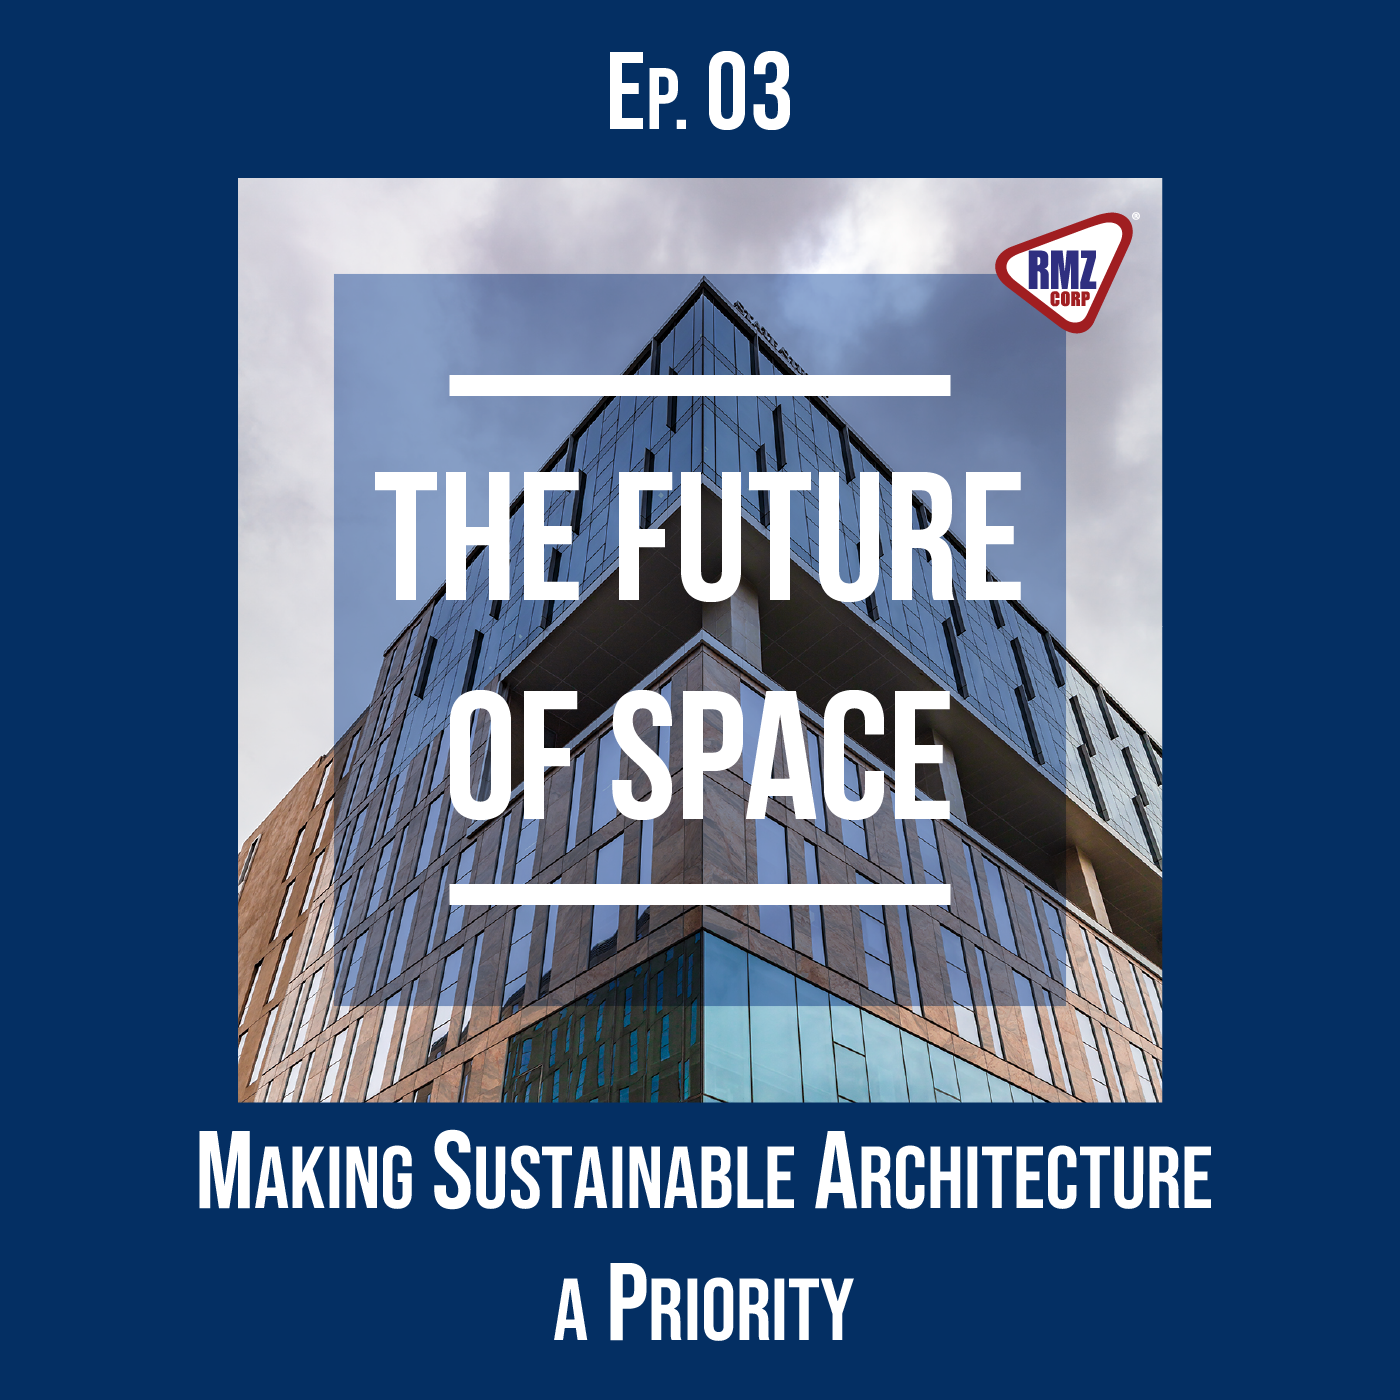 Ep. 03: Making Sustainable Architecture a Priority